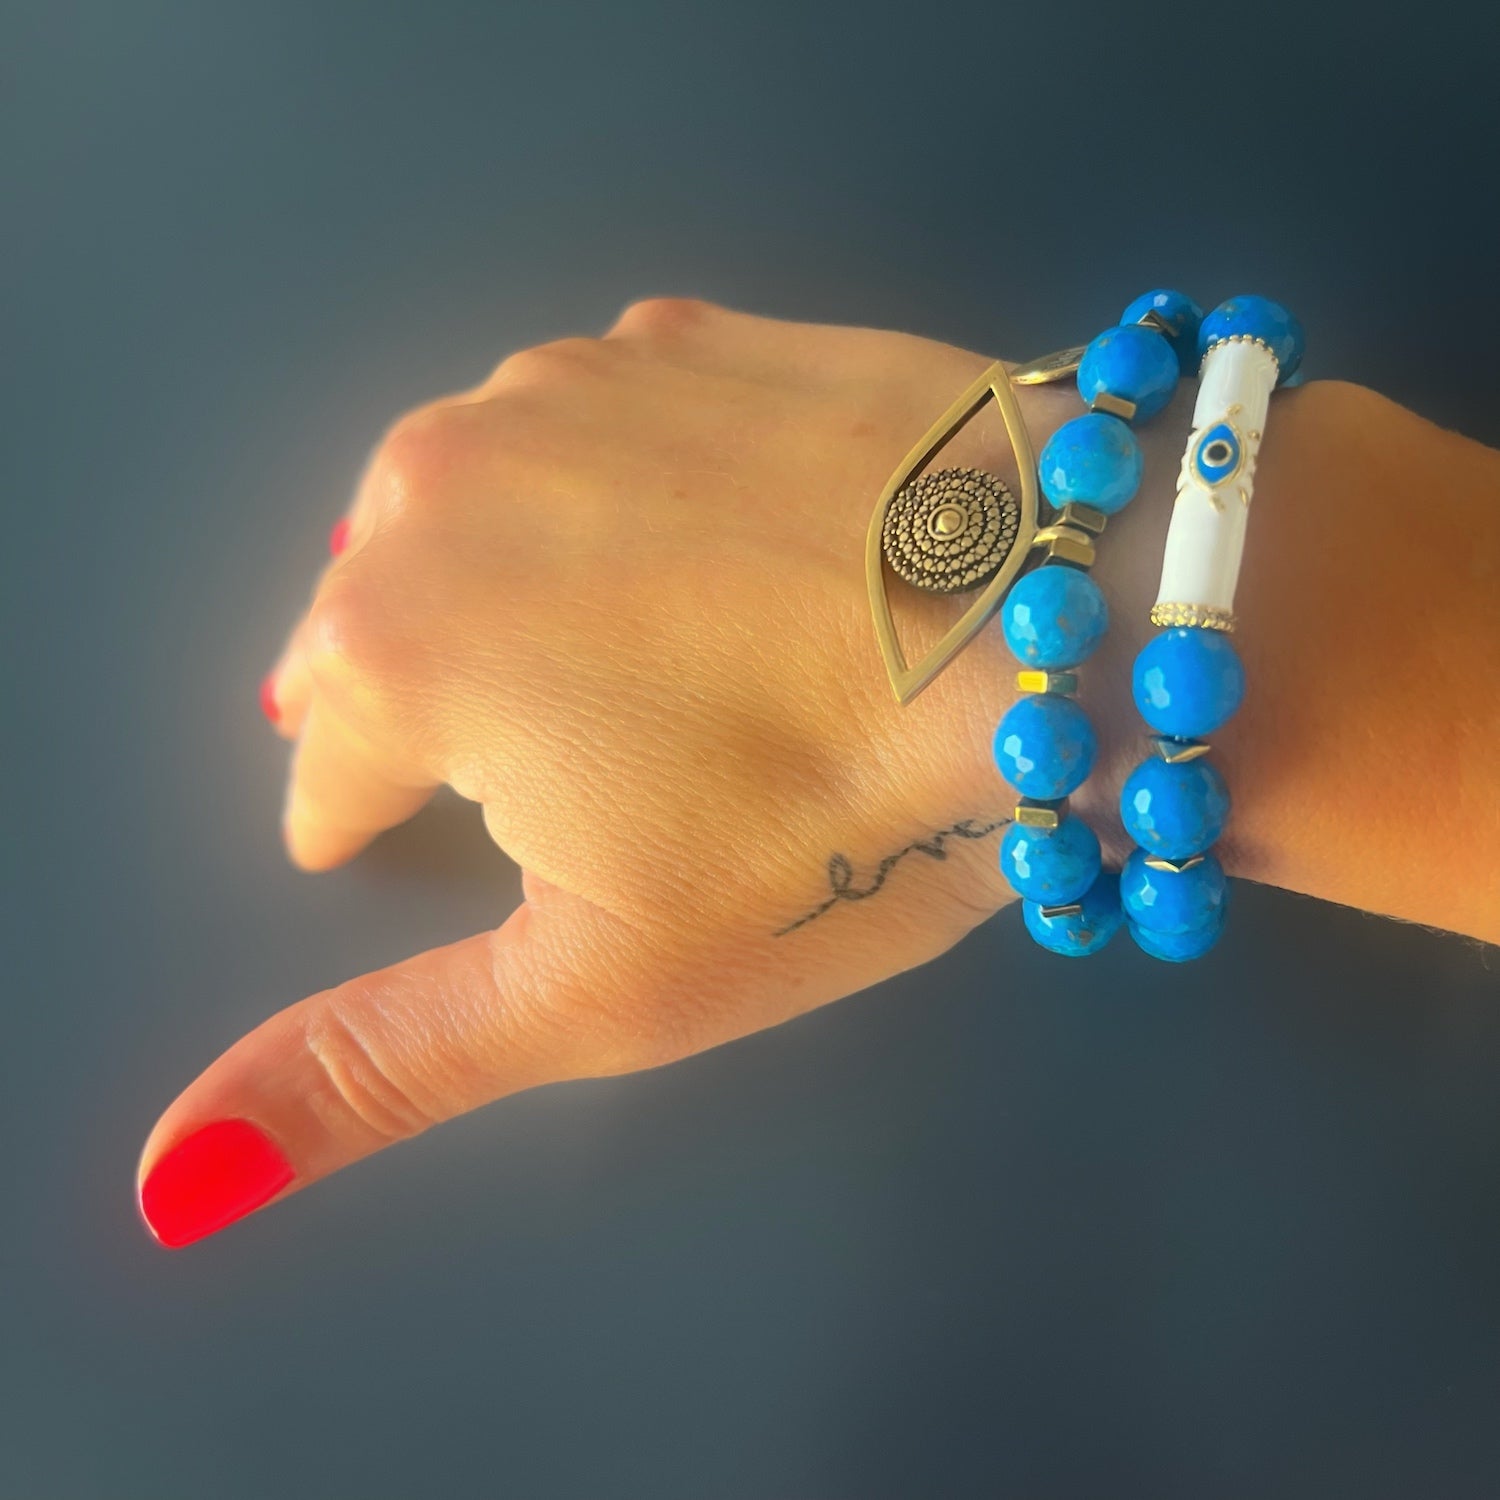 See how the Turquoise Inner Calm Bracelet beautifully adorns the hand model's wrist, radiating a sense of tranquility and sophistication.